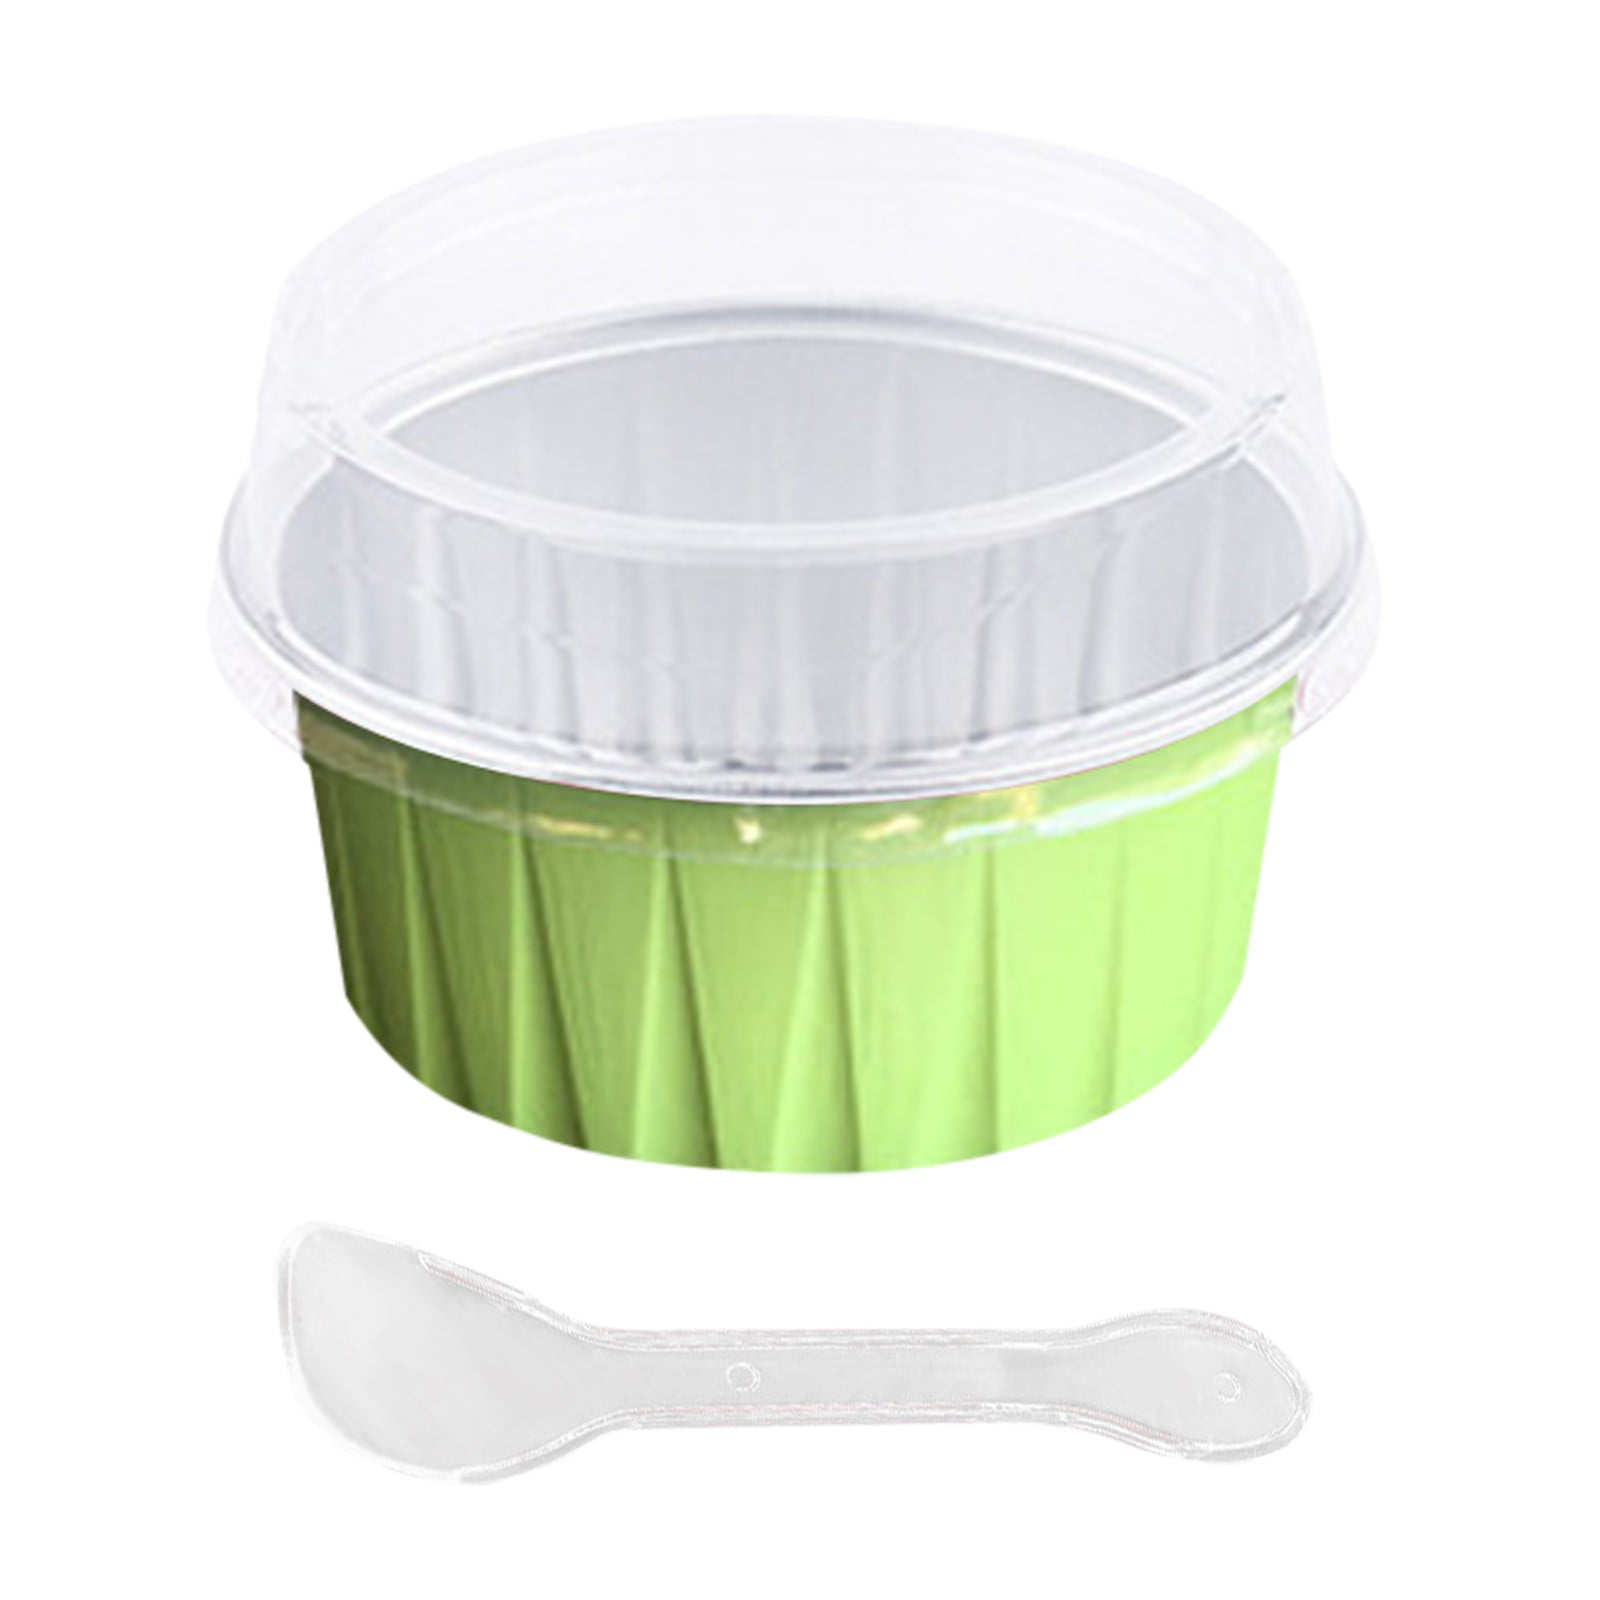 aluminum-foil-cupcake-lined-aluminum-foil-mini-cupcake-container-with-cover-baking-cup-muffin